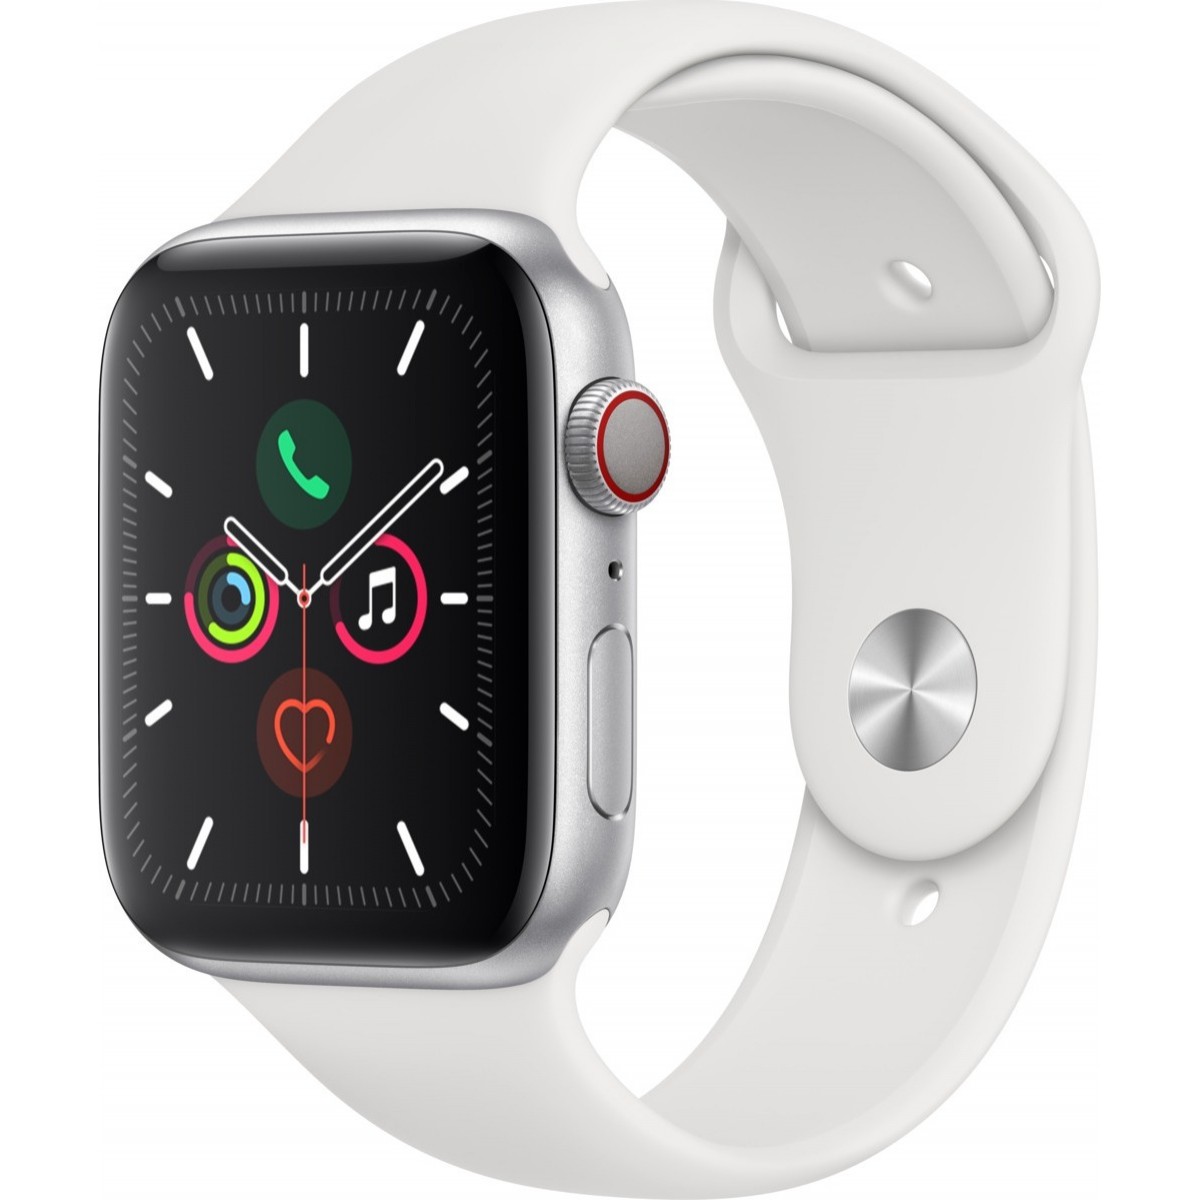 APPLE WATCH 5 44mm GPS+CELLULAR SILVER ALUMINUM WITH WHITE SPORT BAND EU (MWWC2)